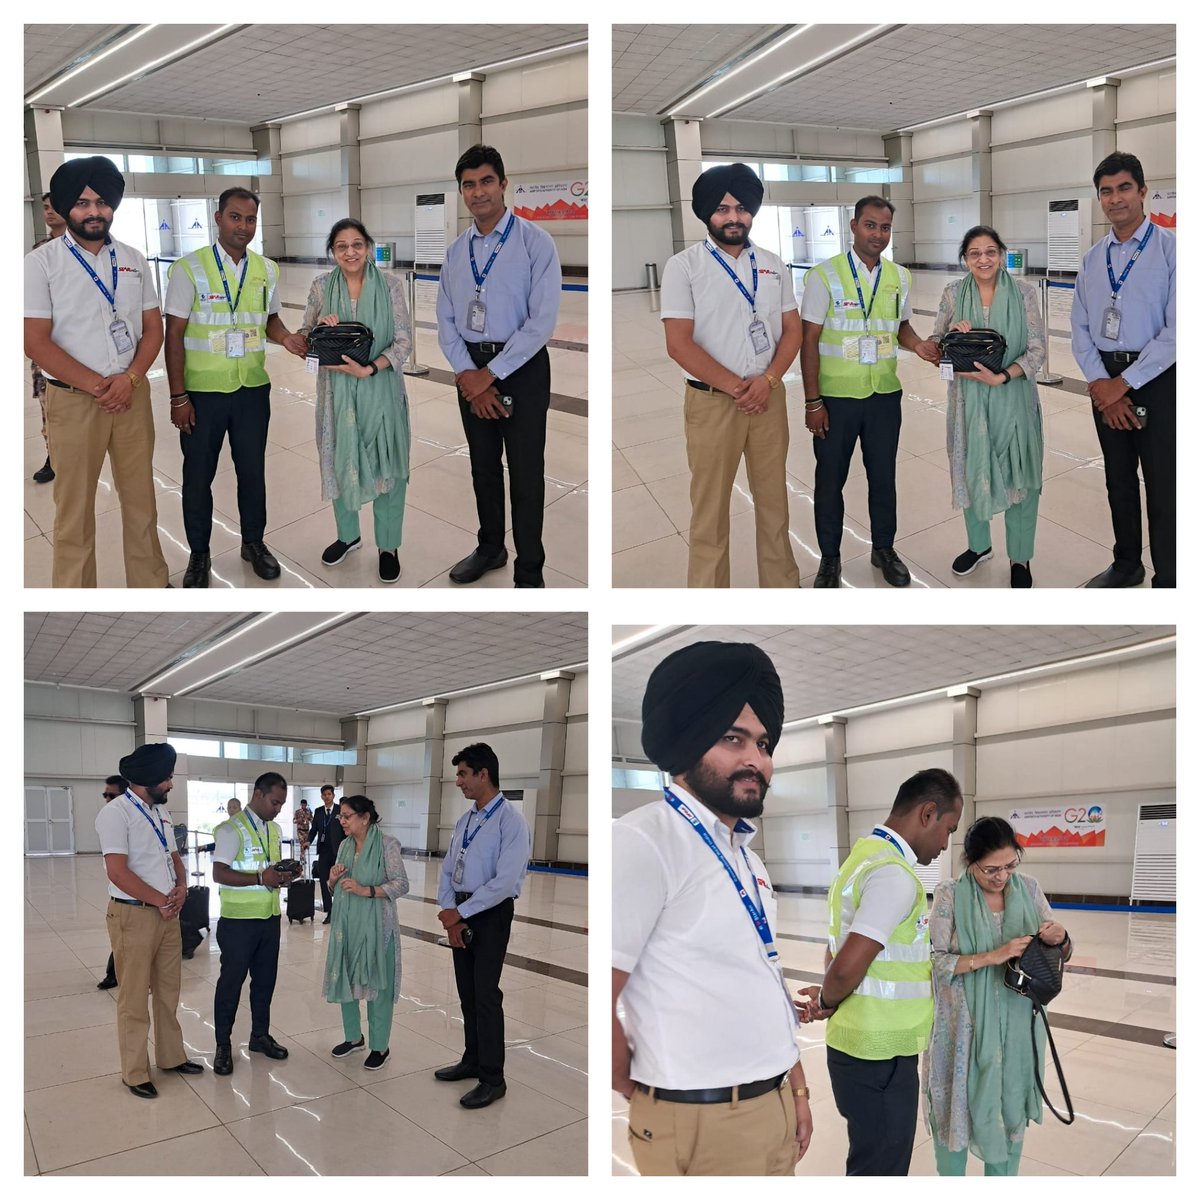 A passenger travelling from Nanded to Hindon lost her purse and reported to AAI officials through coordination with @starair. She found her Purse at Hindon Airport and expressed immense relief and joy upon receiving her purse in intact condition. @AAI_Official @aaiRedNR